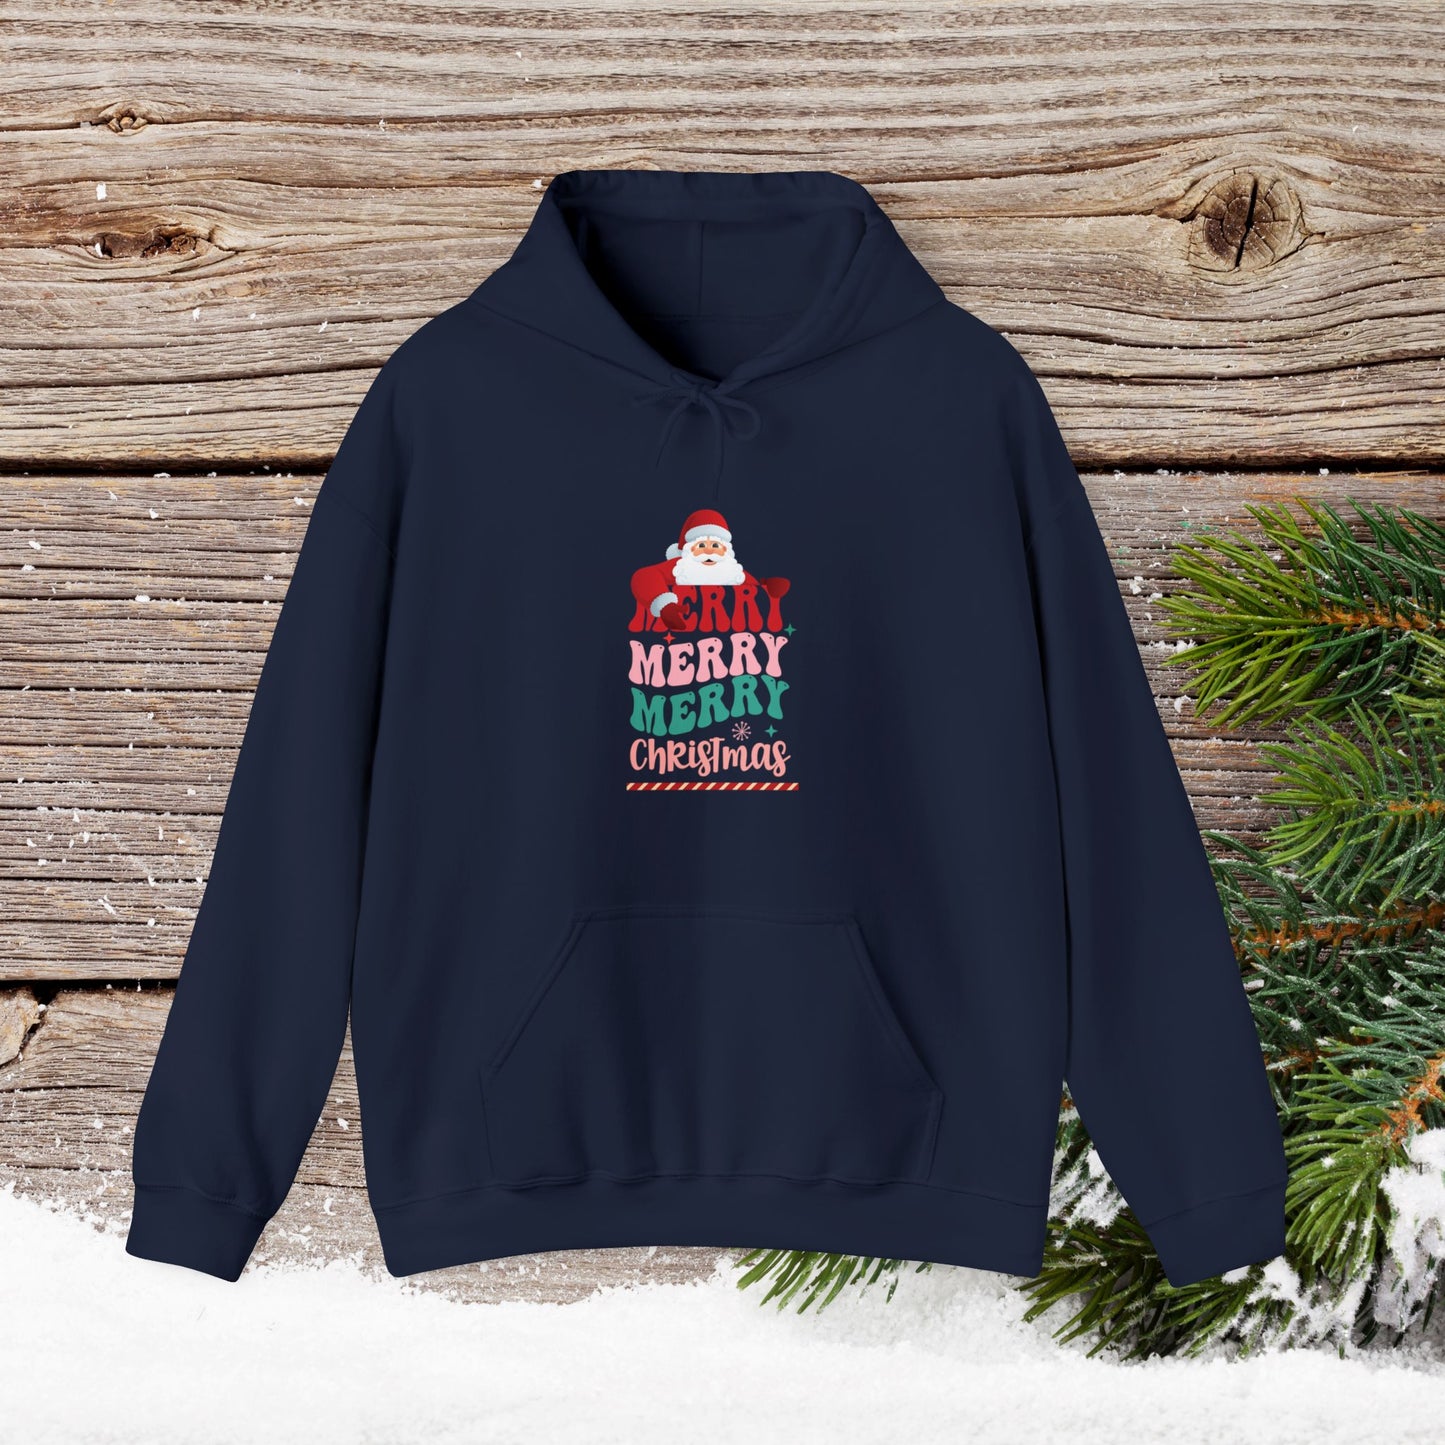 Christmas Hoodie - Merry Merry Merry Christmas - Cute Christmas Shirts - Youth and Adult Christmas Hooded Sweatshirt Hooded Sweatshirt Graphic Avenue Navy Adult Small 